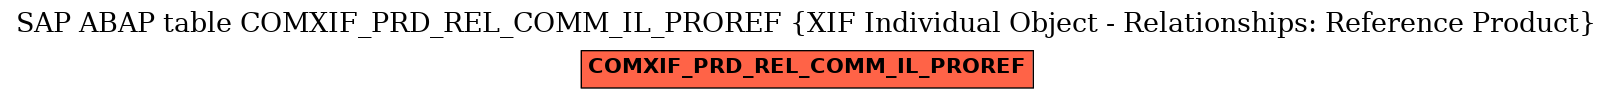 E-R Diagram for table COMXIF_PRD_REL_COMM_IL_PROREF (XIF Individual Object - Relationships: Reference Product)